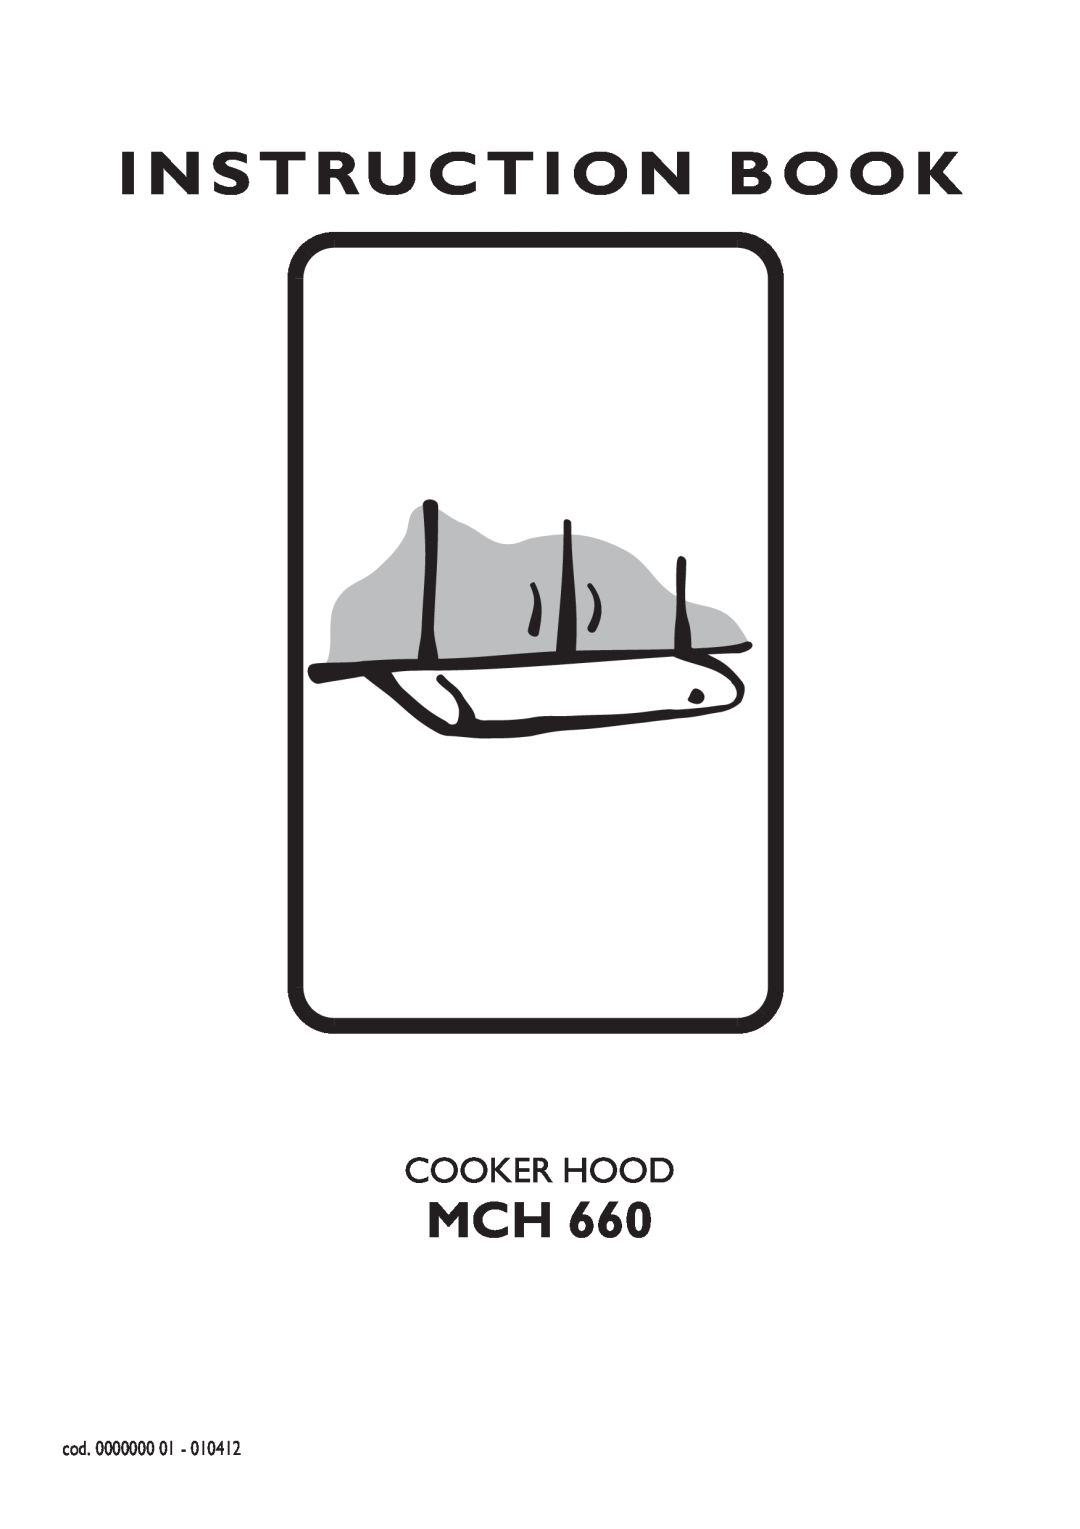 Electrolux MCH 660 manual Instruction Book, Cooker Hood 